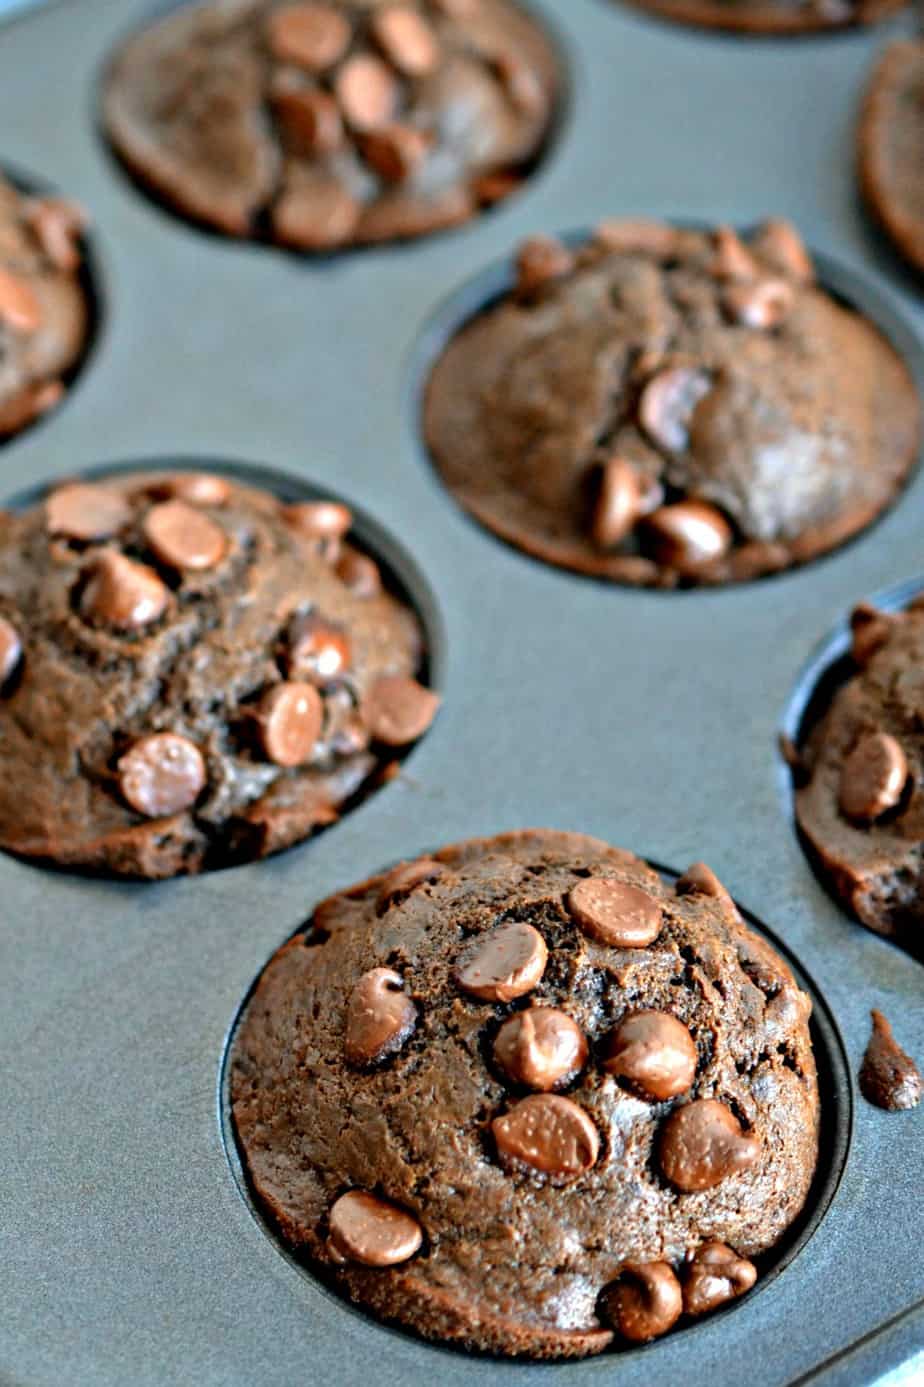 This Chocolate Chip Muffin Recipe is simple and sweet, perfect for any chocolate lover.